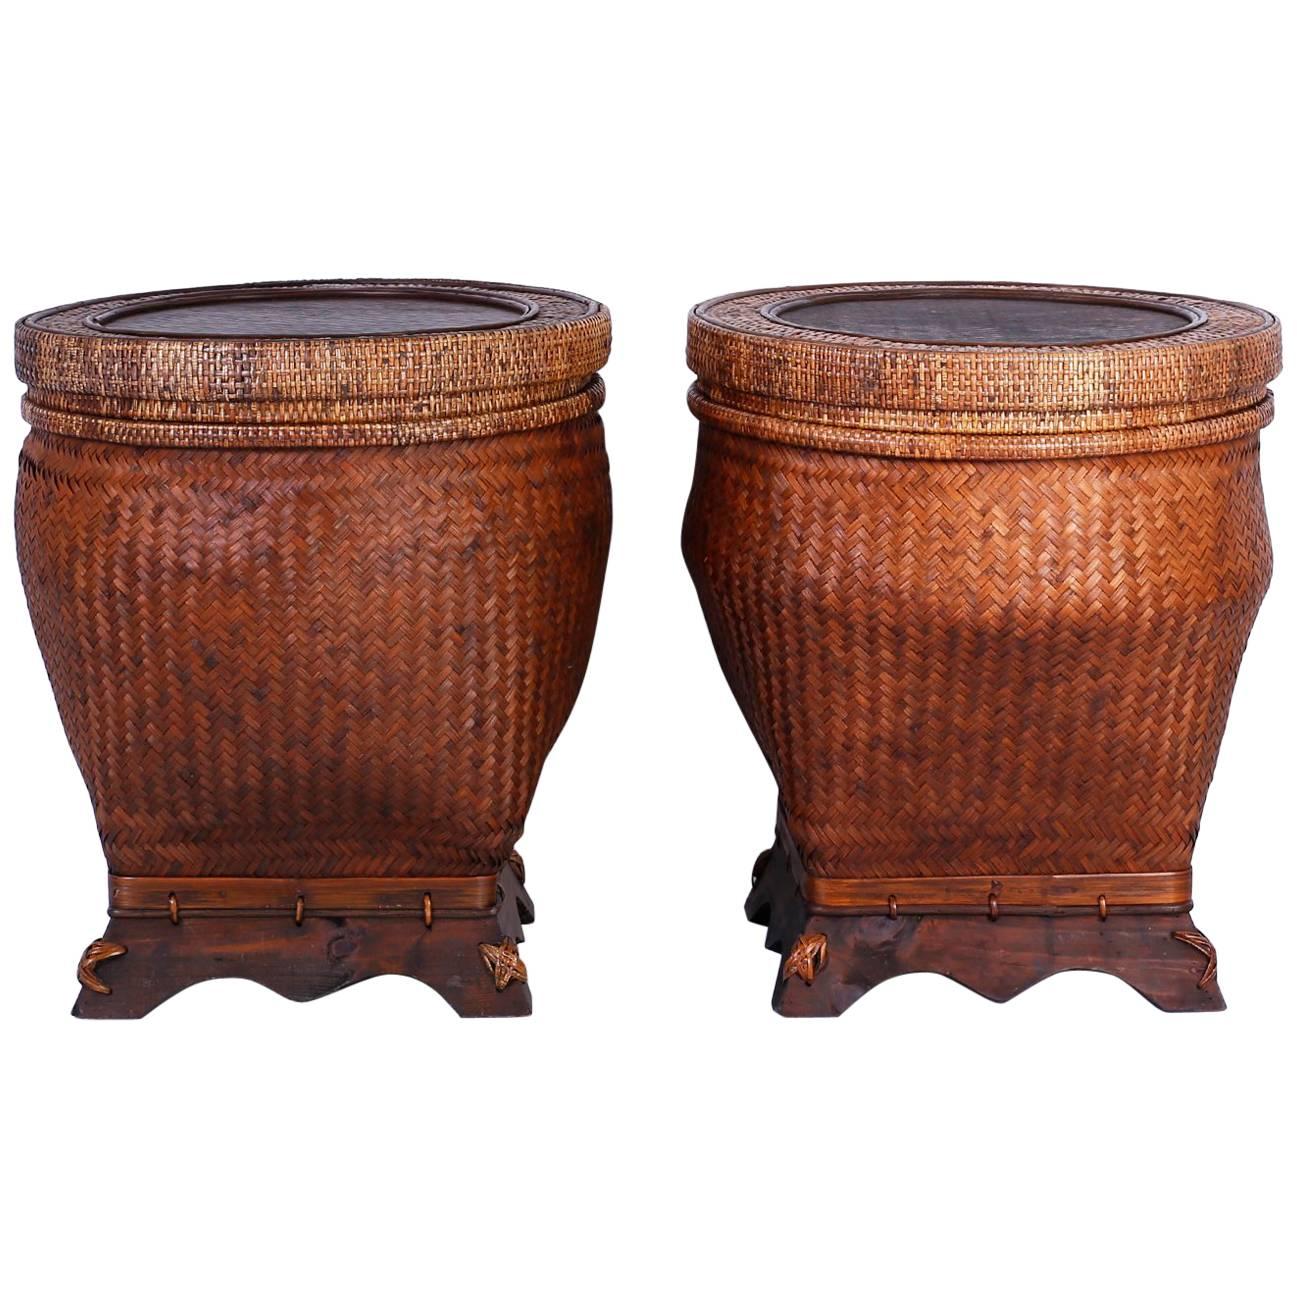 Pair of Lidded Rattan Baskets or Tables